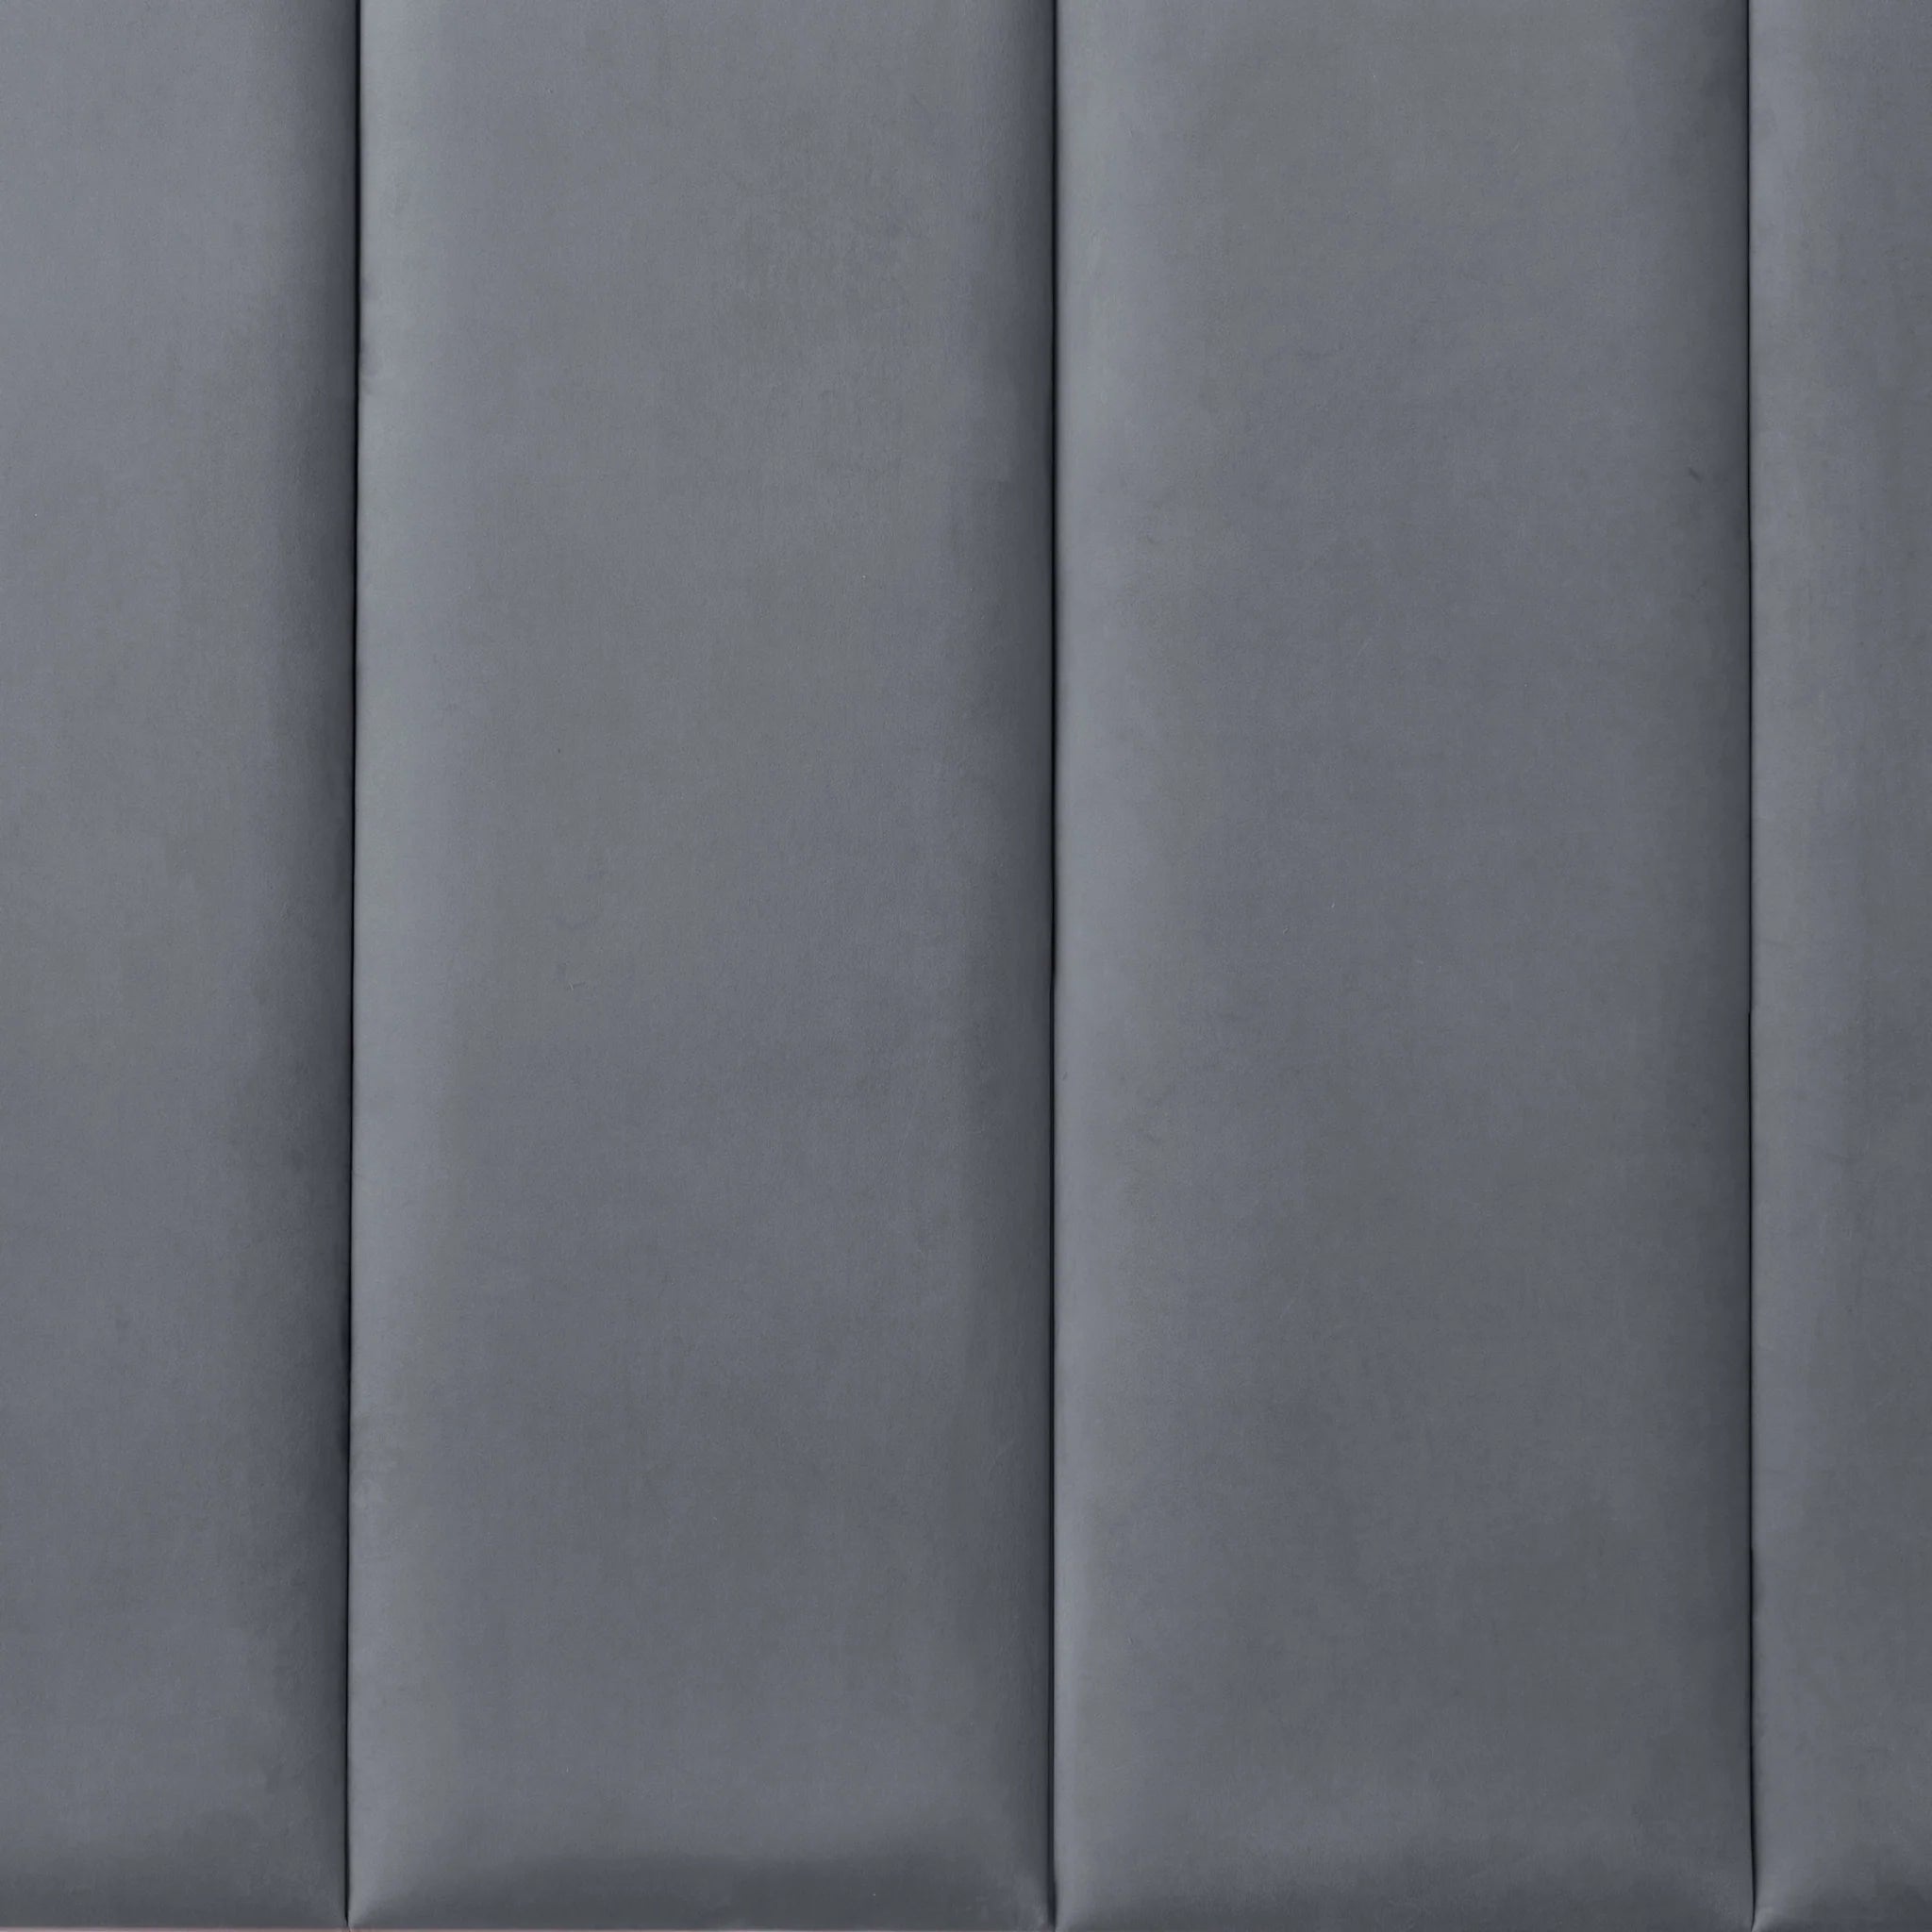 Graphite upholstered wall panel with padded surface, close-up view